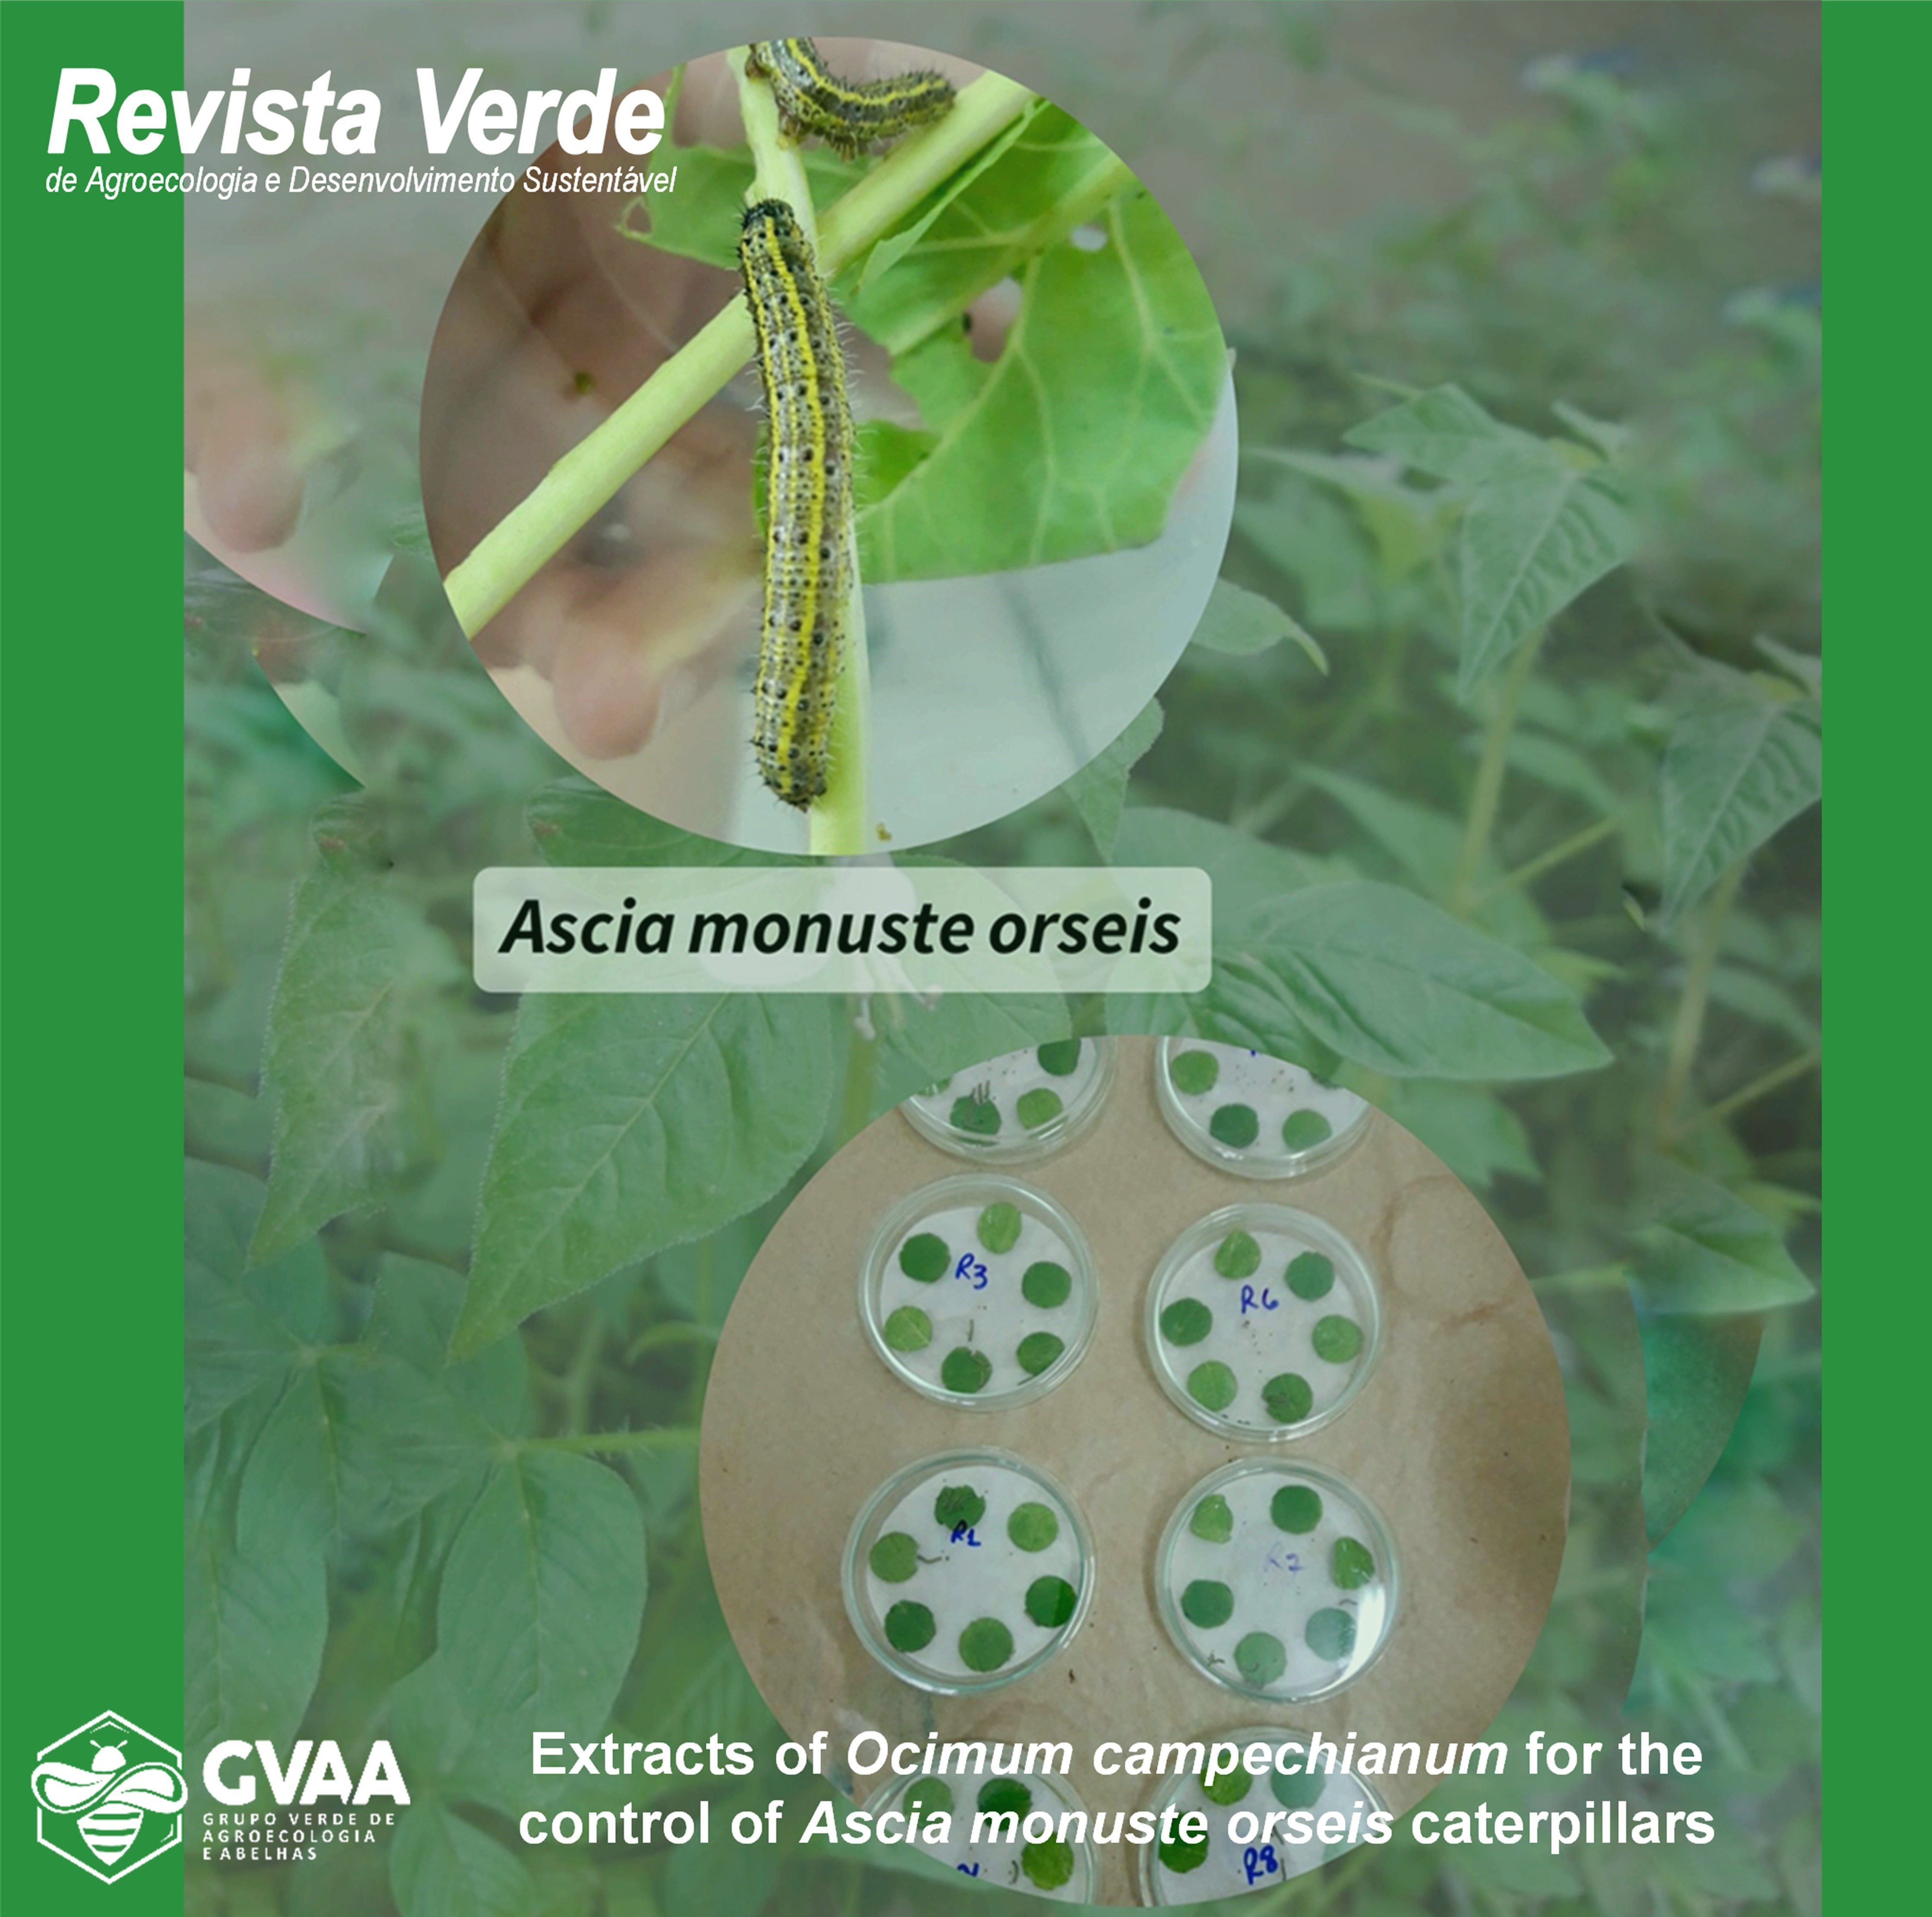 Extracts of Ocimum campechianum for the control of Ascia monuste orseis caterpillars: responses on preference and development